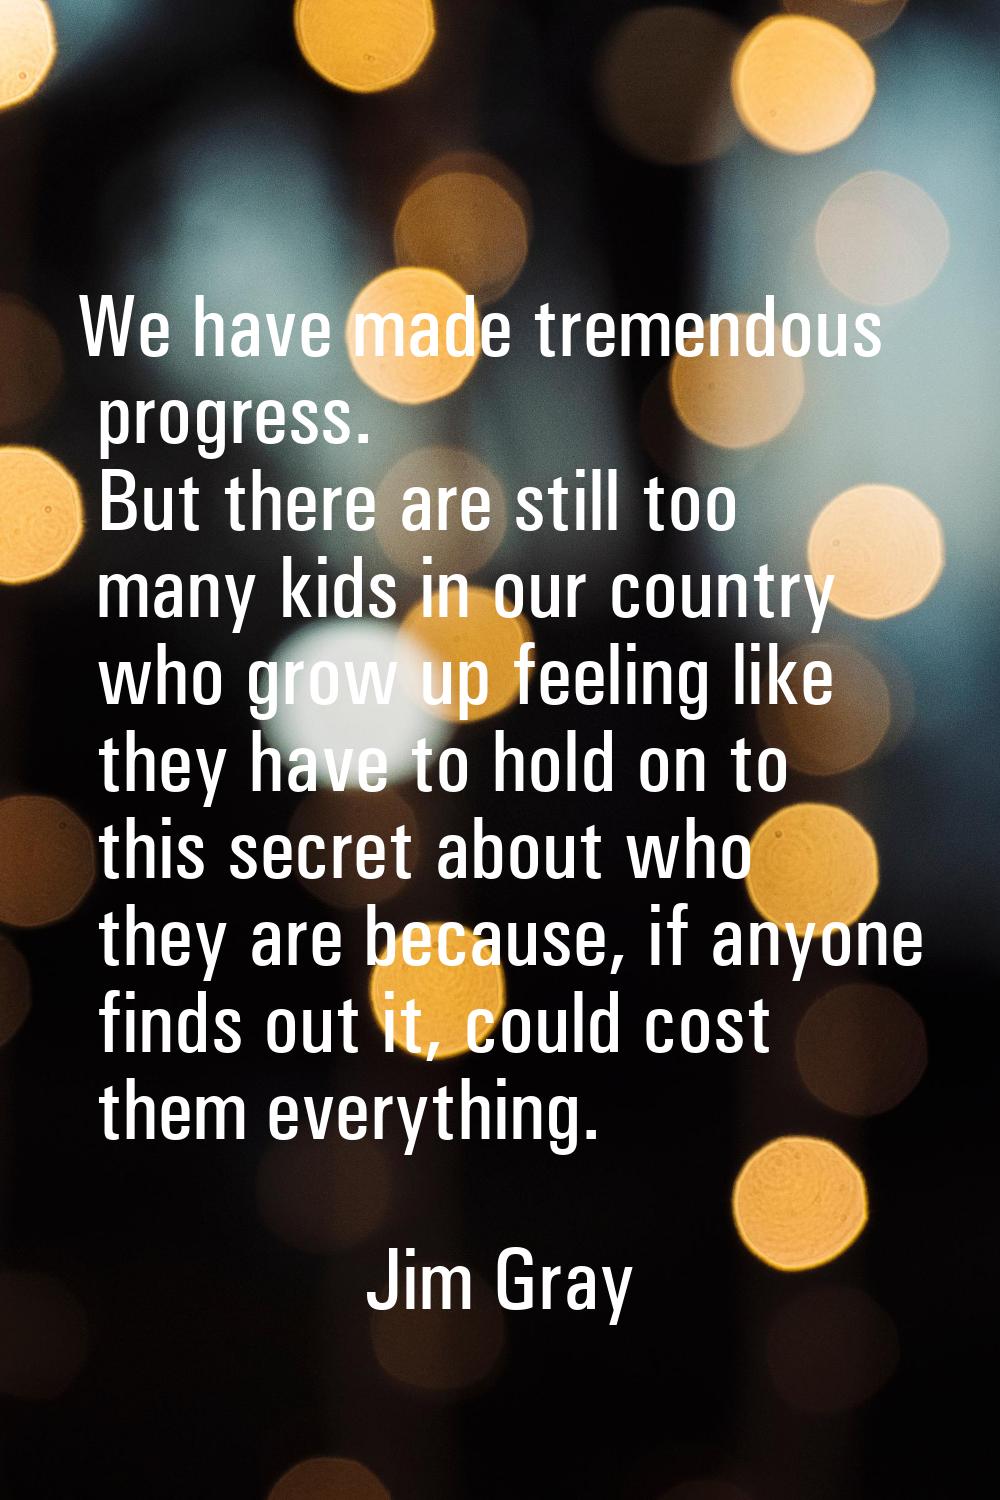 We have made tremendous progress. But there are still too many kids in our country who grow up feel